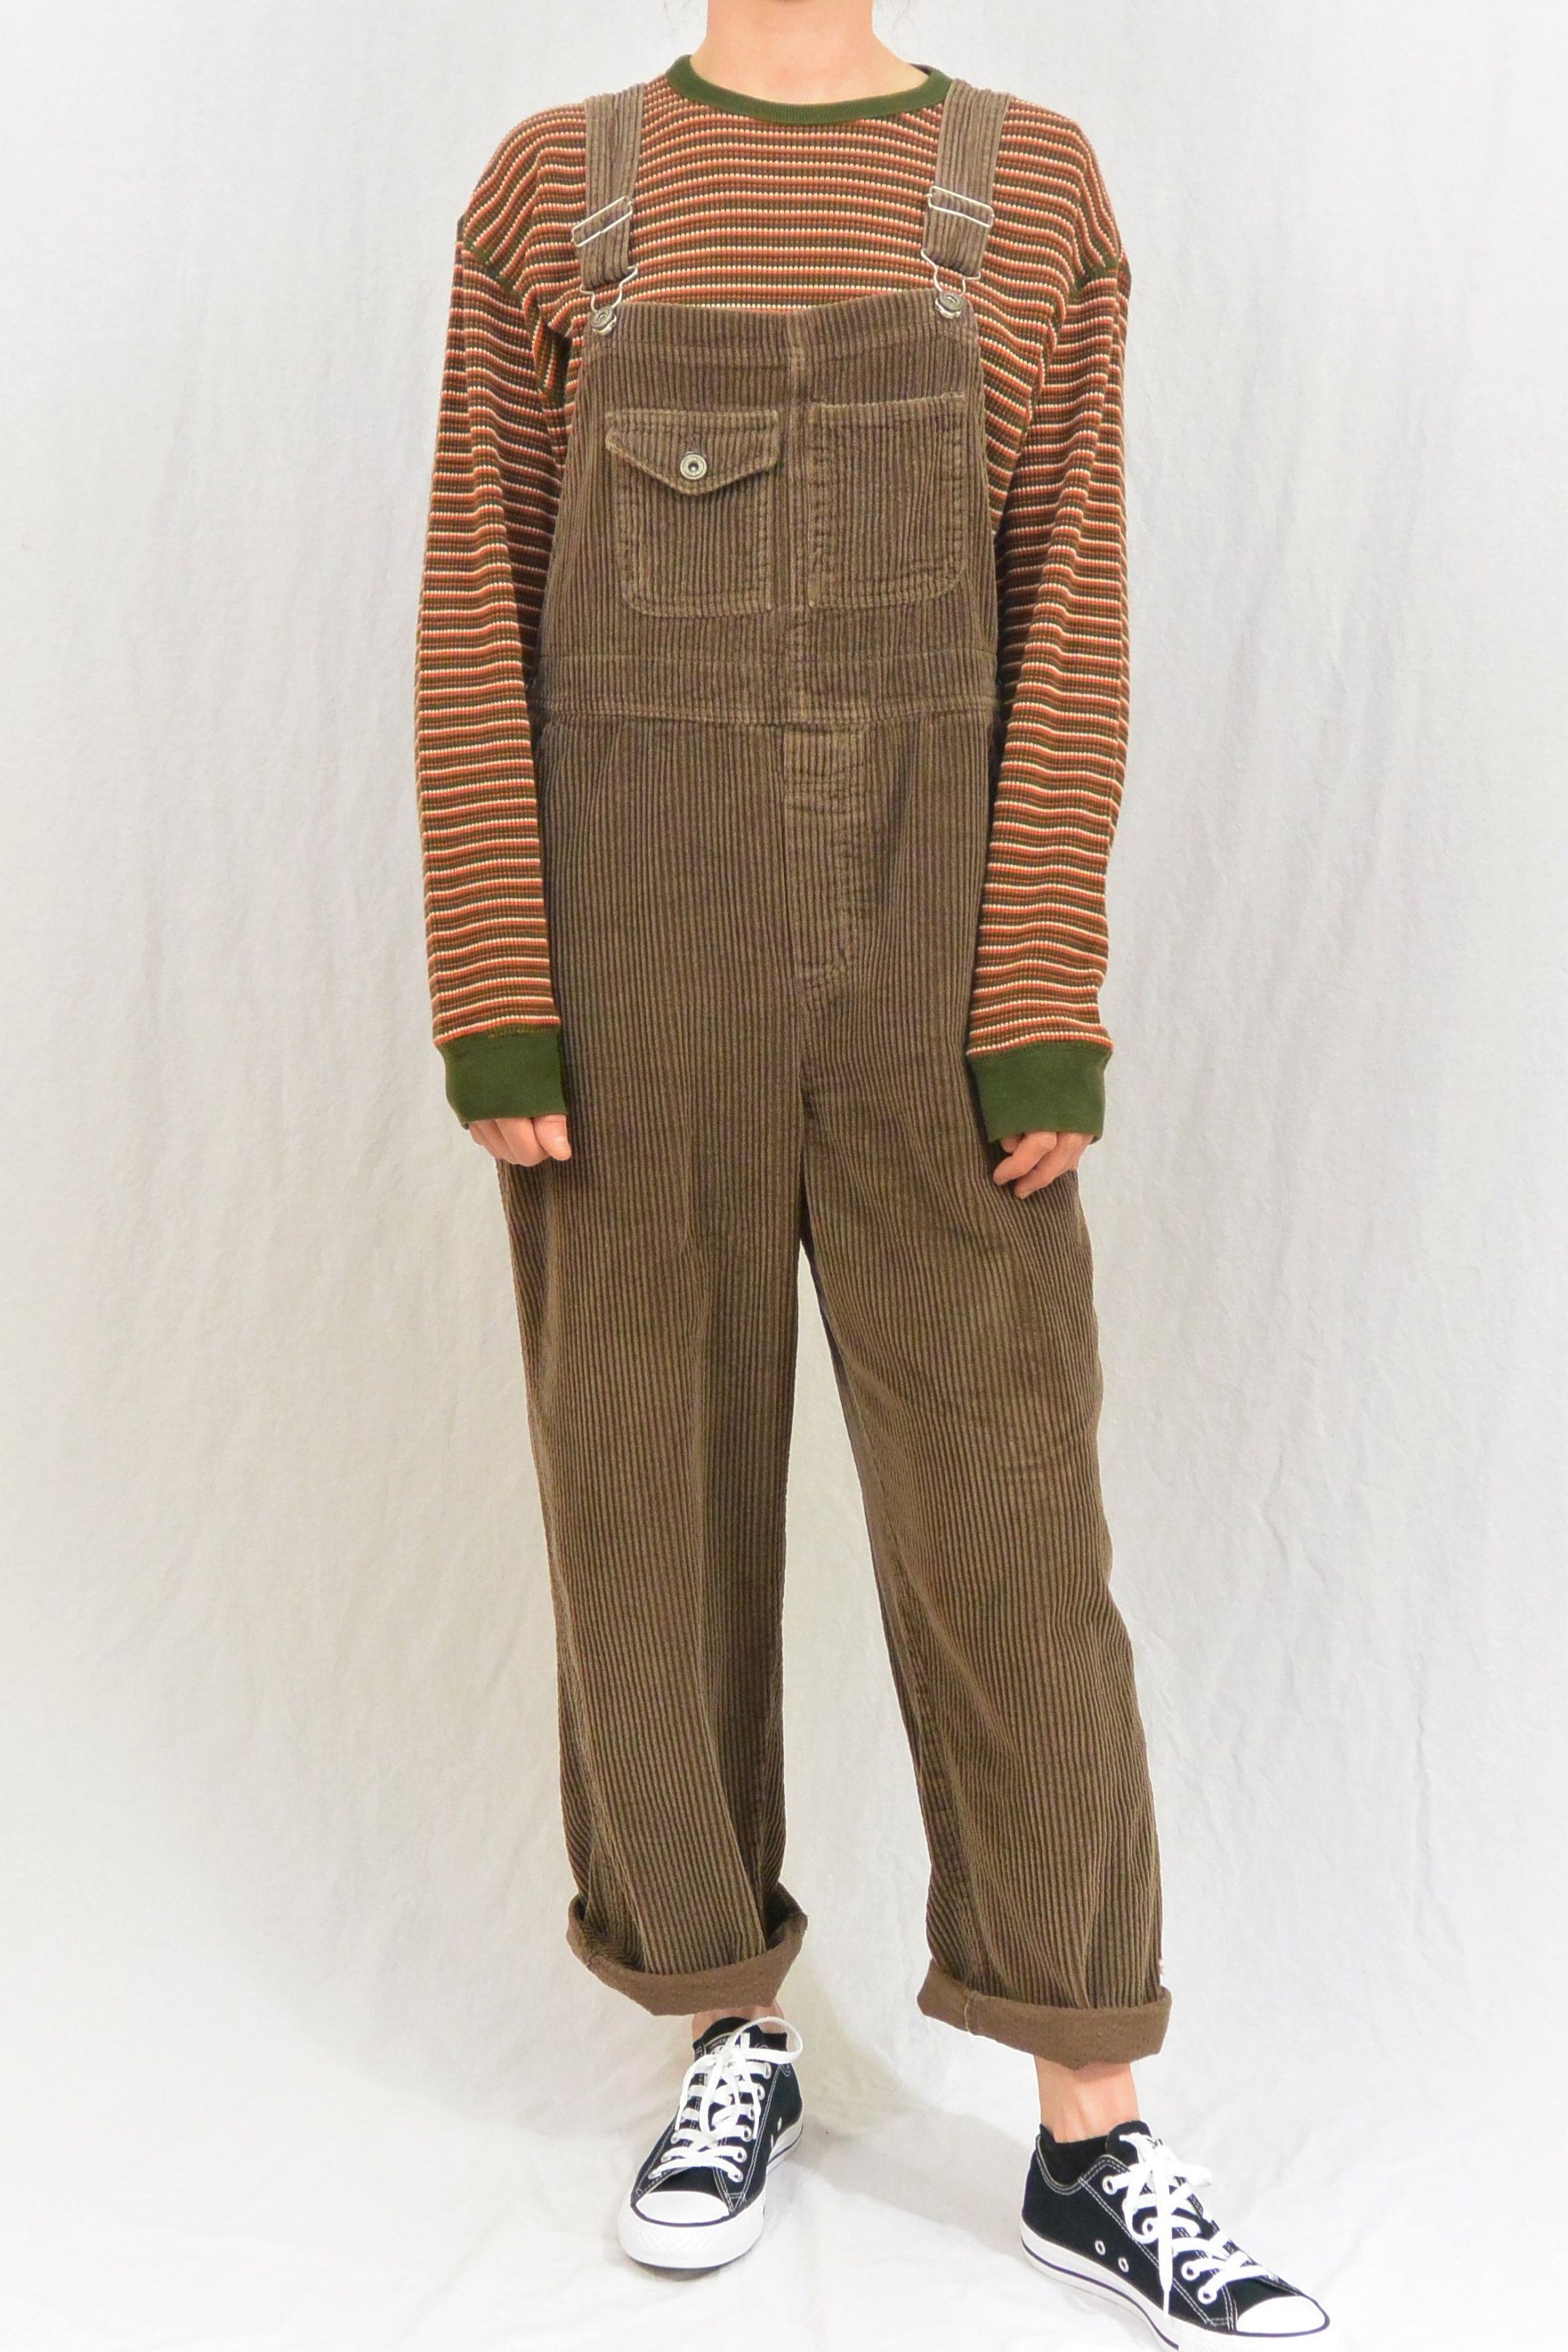 Vintage Brown Corduroy Overalls, Medium Overalls, 90's Aesthetic, Grunge, Urban Hipster, My So Called Life Clothing, Skater Overalls - Vintage Brown Corduroy Overalls, Medium Overalls, 90's Aesthetic, Grunge, Urban Hipster, My So Called Life Clothing, Skater Overalls -   17 style Urban hipster ideas